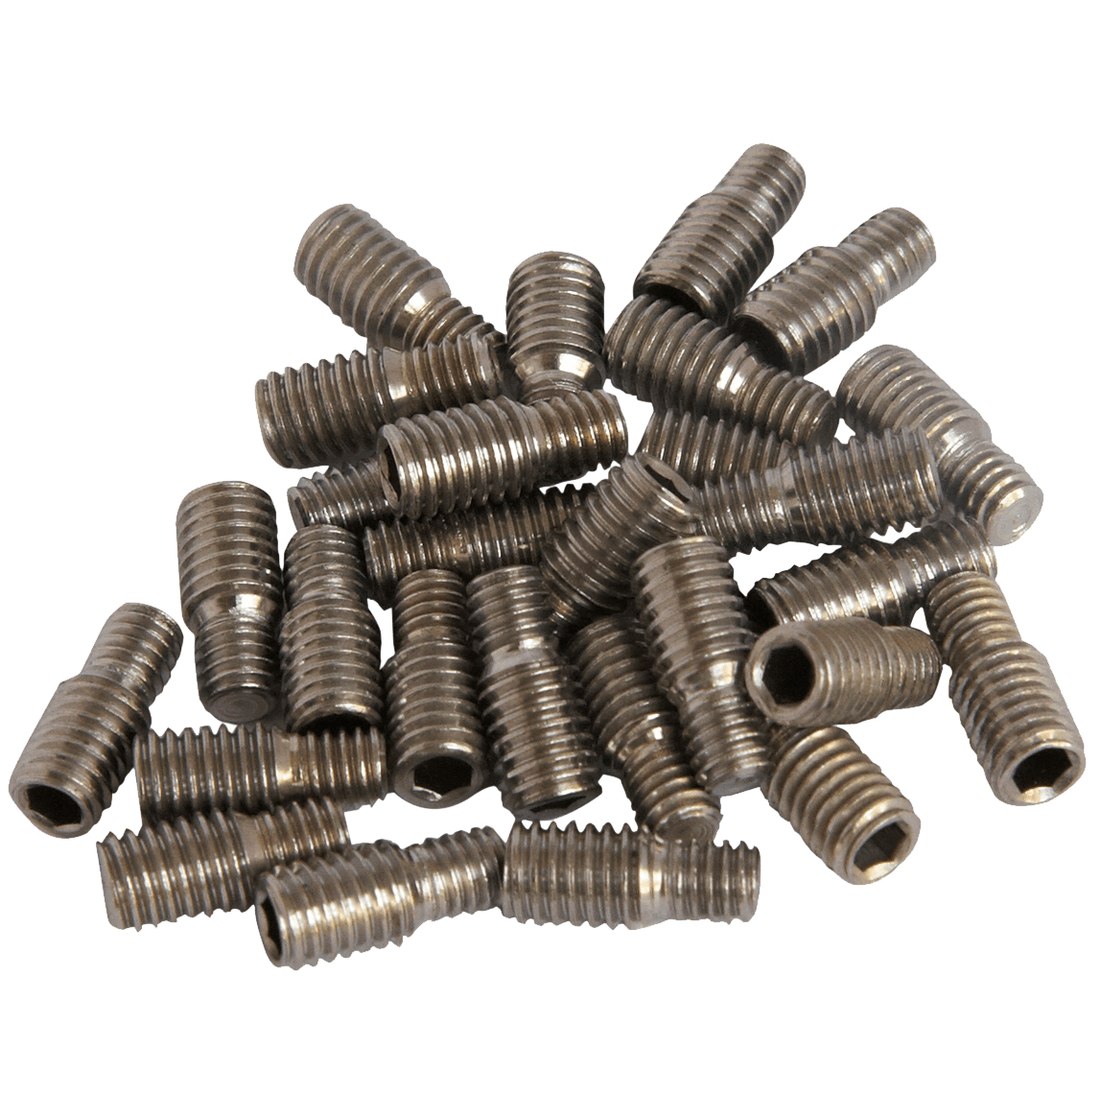 Picture of Burgtec MK4 Pedal Pins - 32 Pieces